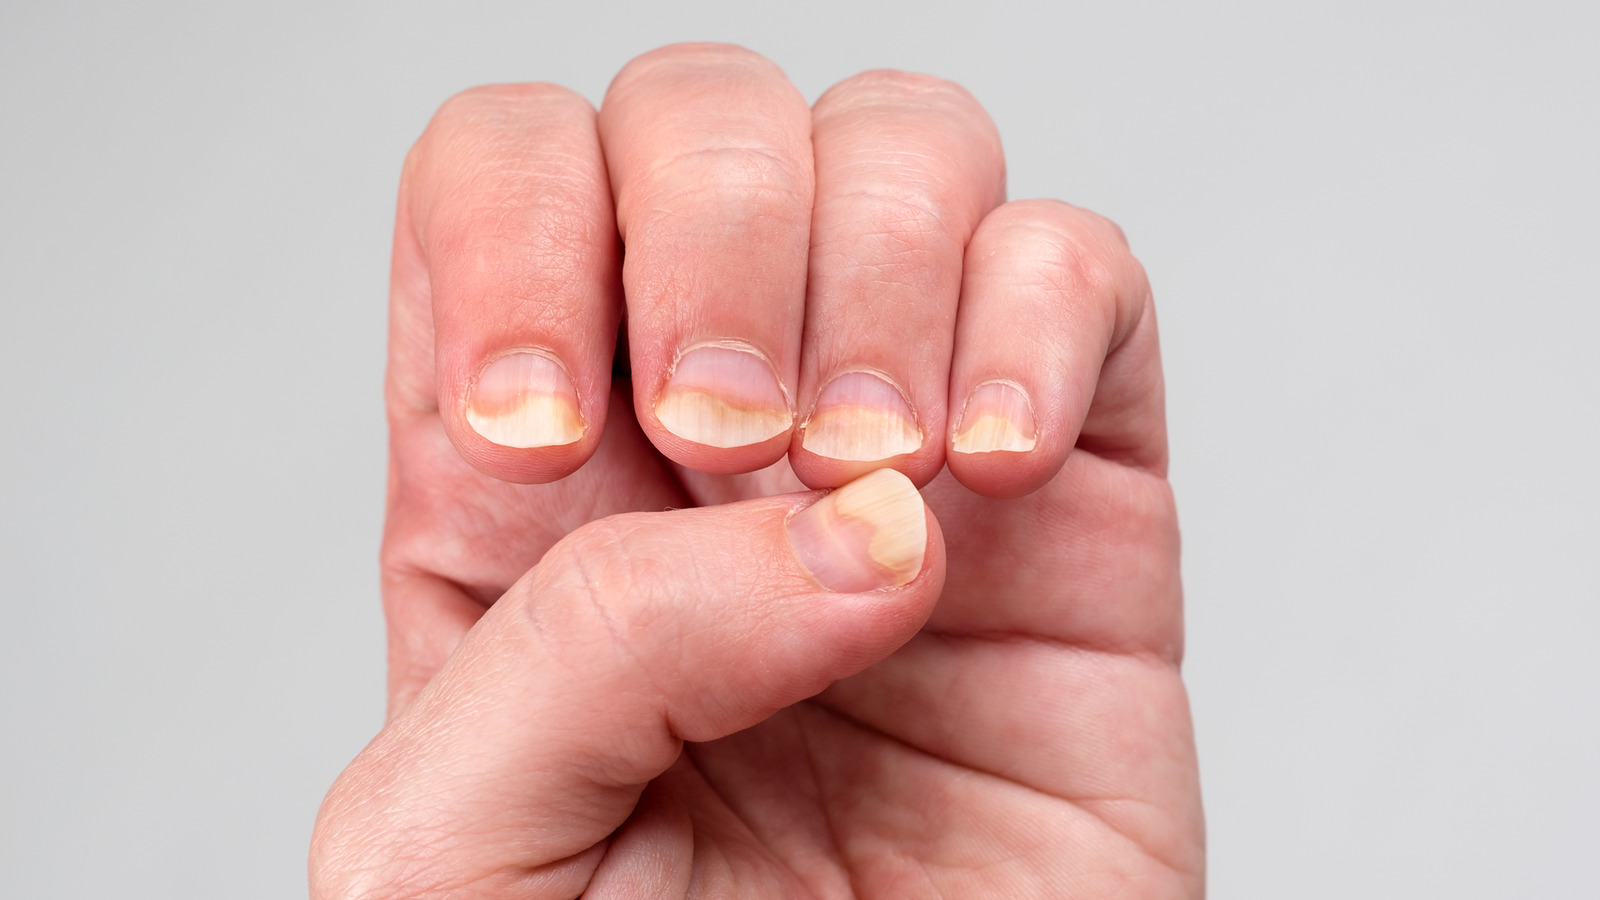 A Natural Cure for Nail Fungus That Gives Amazing Results! - Vitamelia |  Συμπληρώματα διατροφής - Καλλυντικά